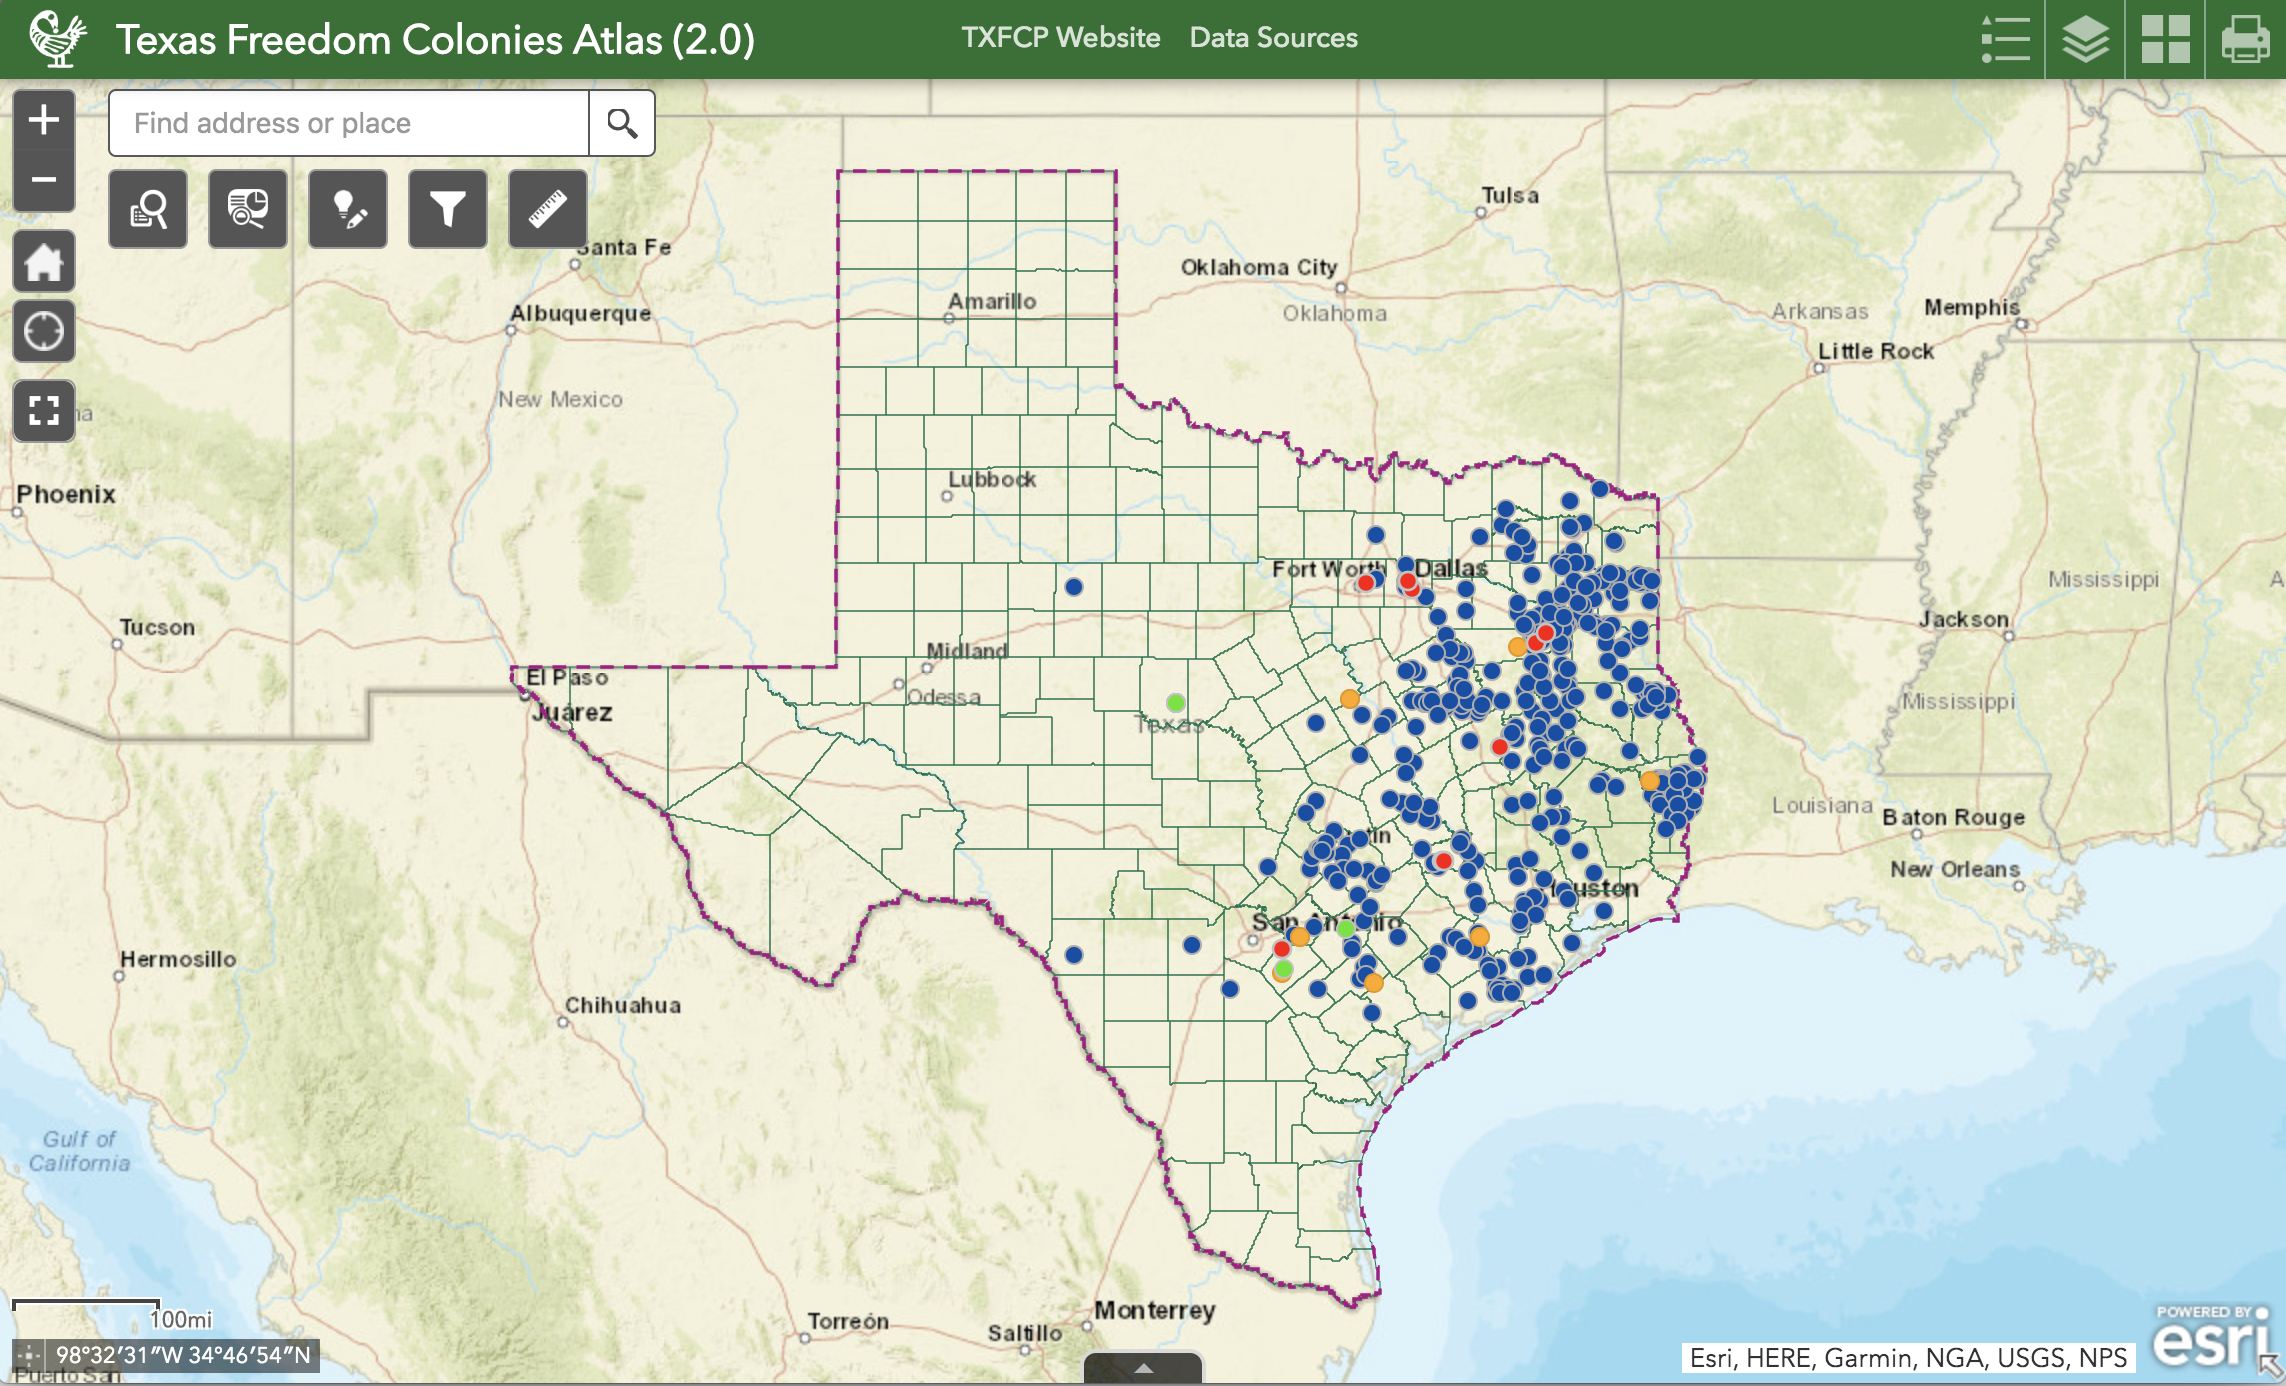 Screenshot of the Texas Freedom Colony Atlas, showing a map of Texas, with blue dots that represent the locations of identified freedom colonies